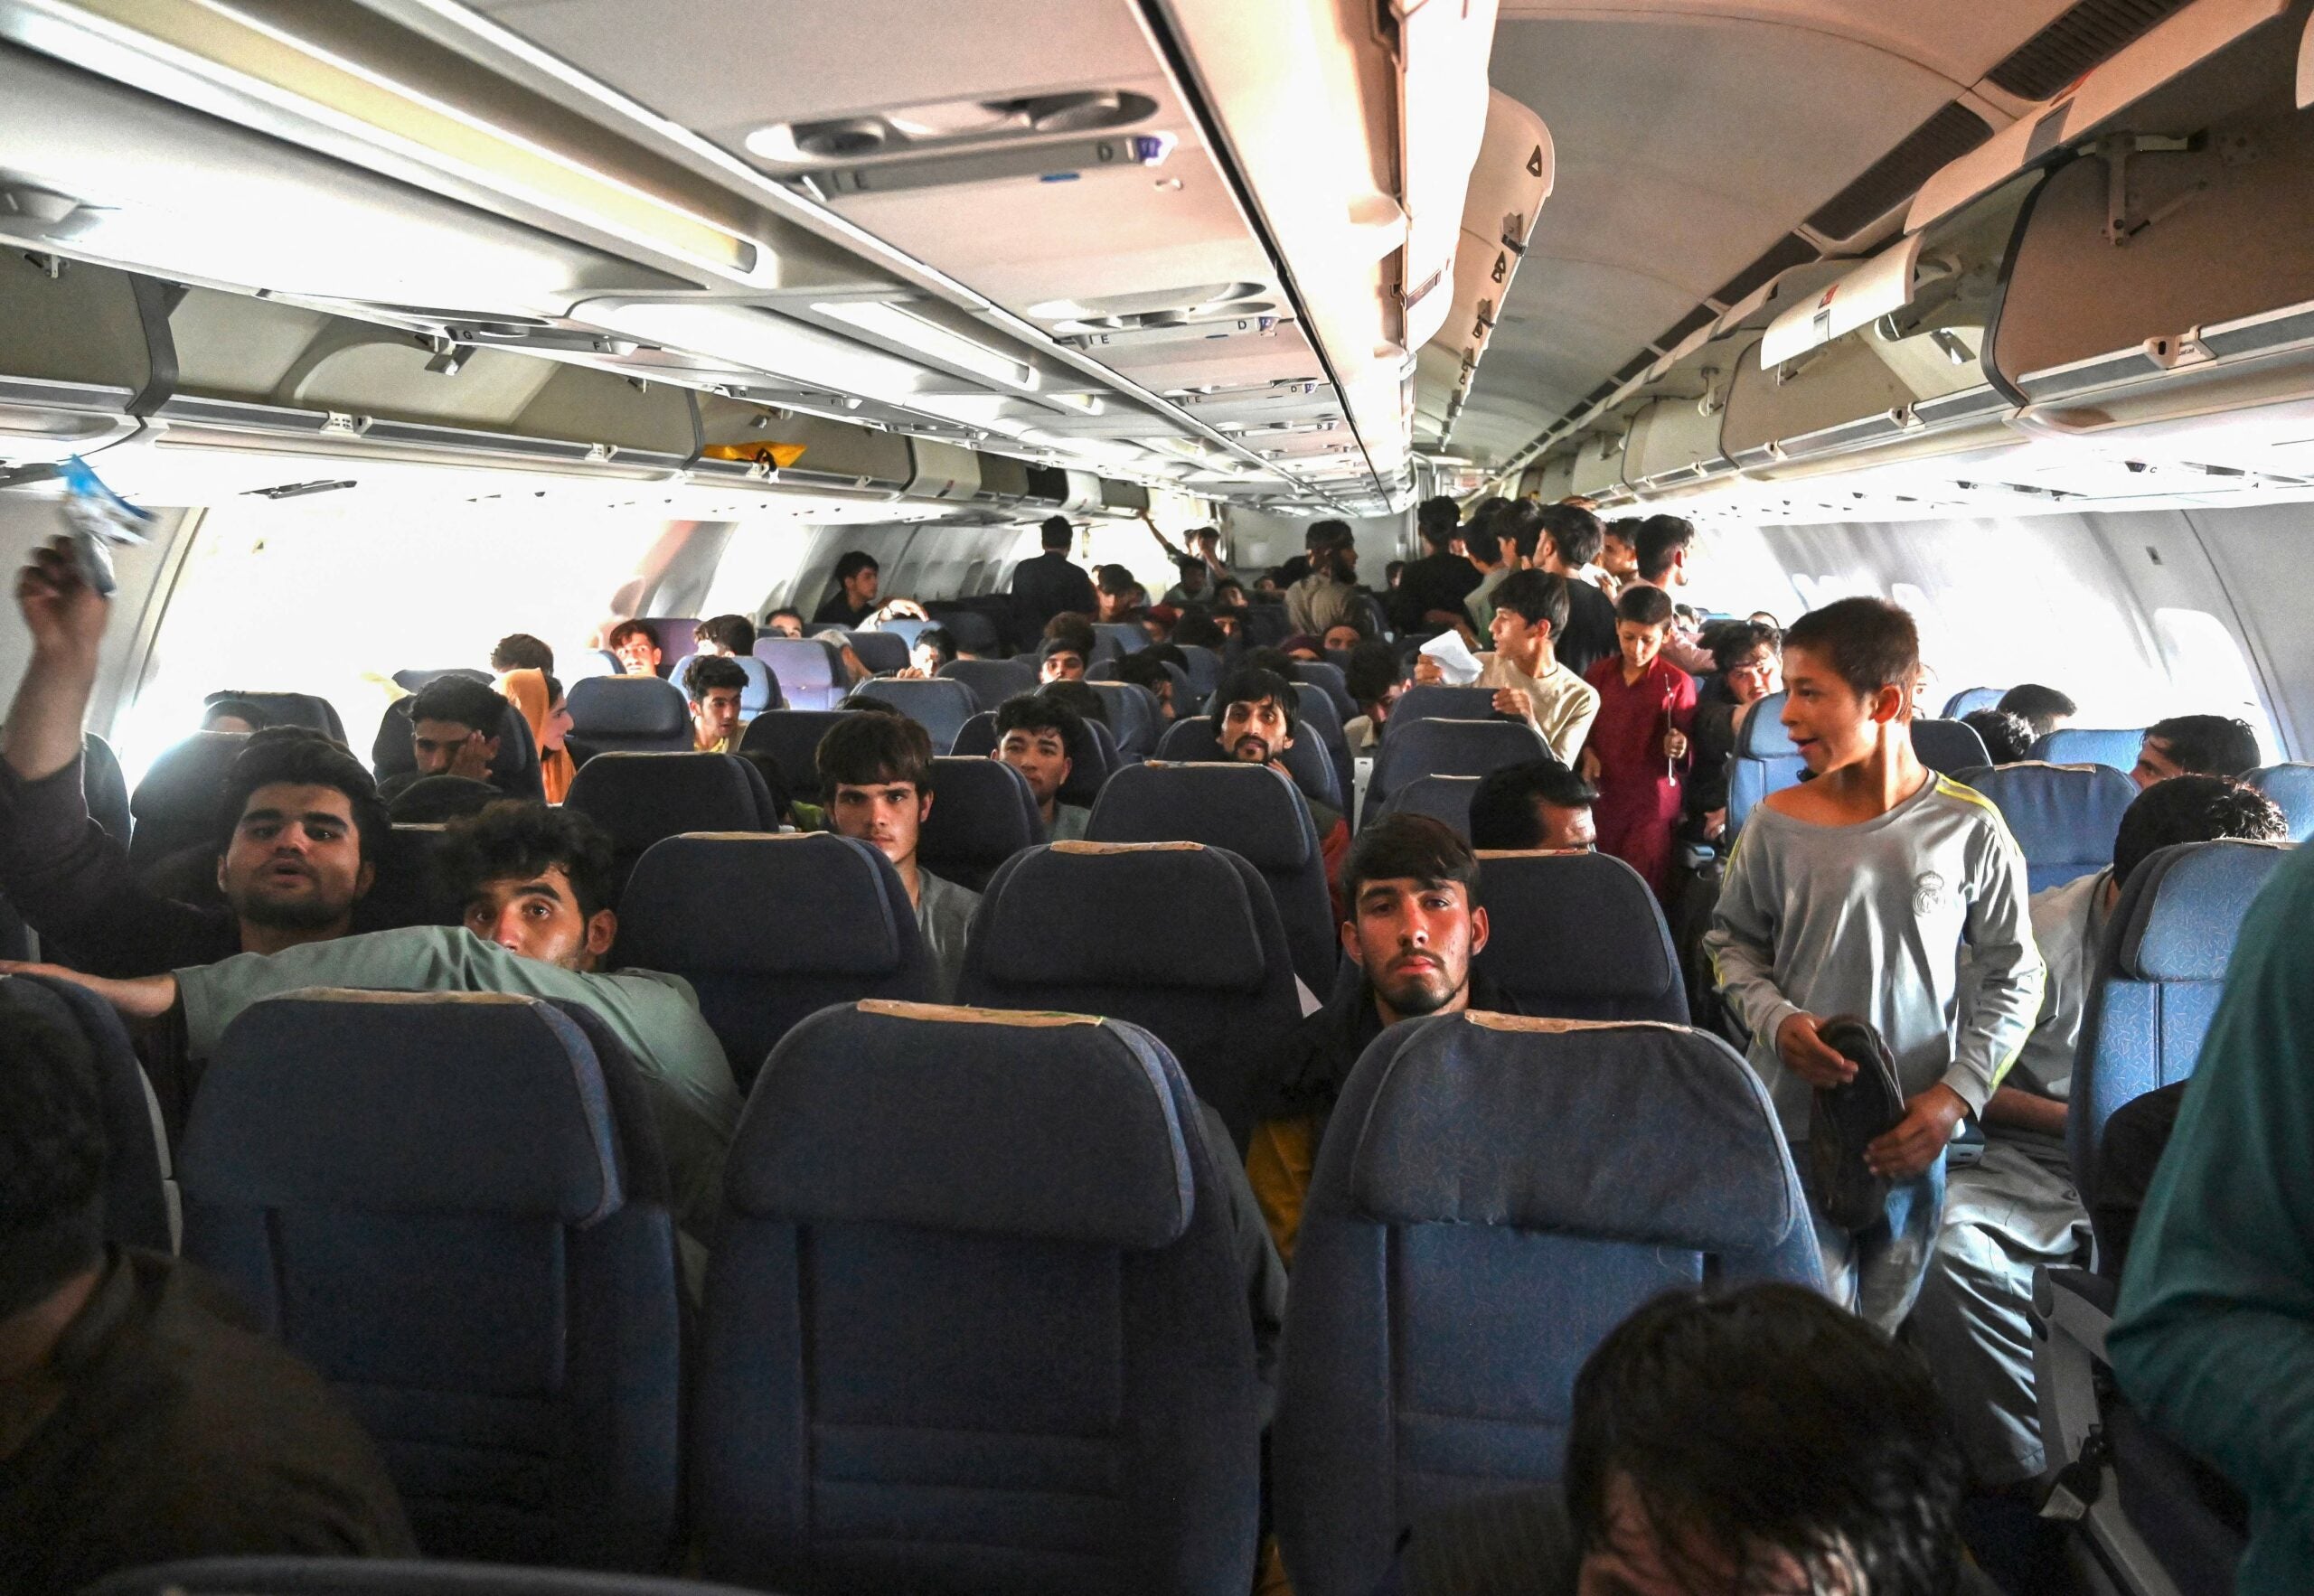 TOPSHOT - Afghan passengers sit inside a plane as they wait to leave the Kabul airport in Kabul on August 16, 2021, after a stunningly swift end to Afghanistan's 20-year war, as thousands of people mobbed the city's airport trying to flee the group's feared hardline brand of Islamist rule. (Photo by Wakil Kohsar / AFP) (Photo by WAKIL KOHSAR/AFP via Getty Images)